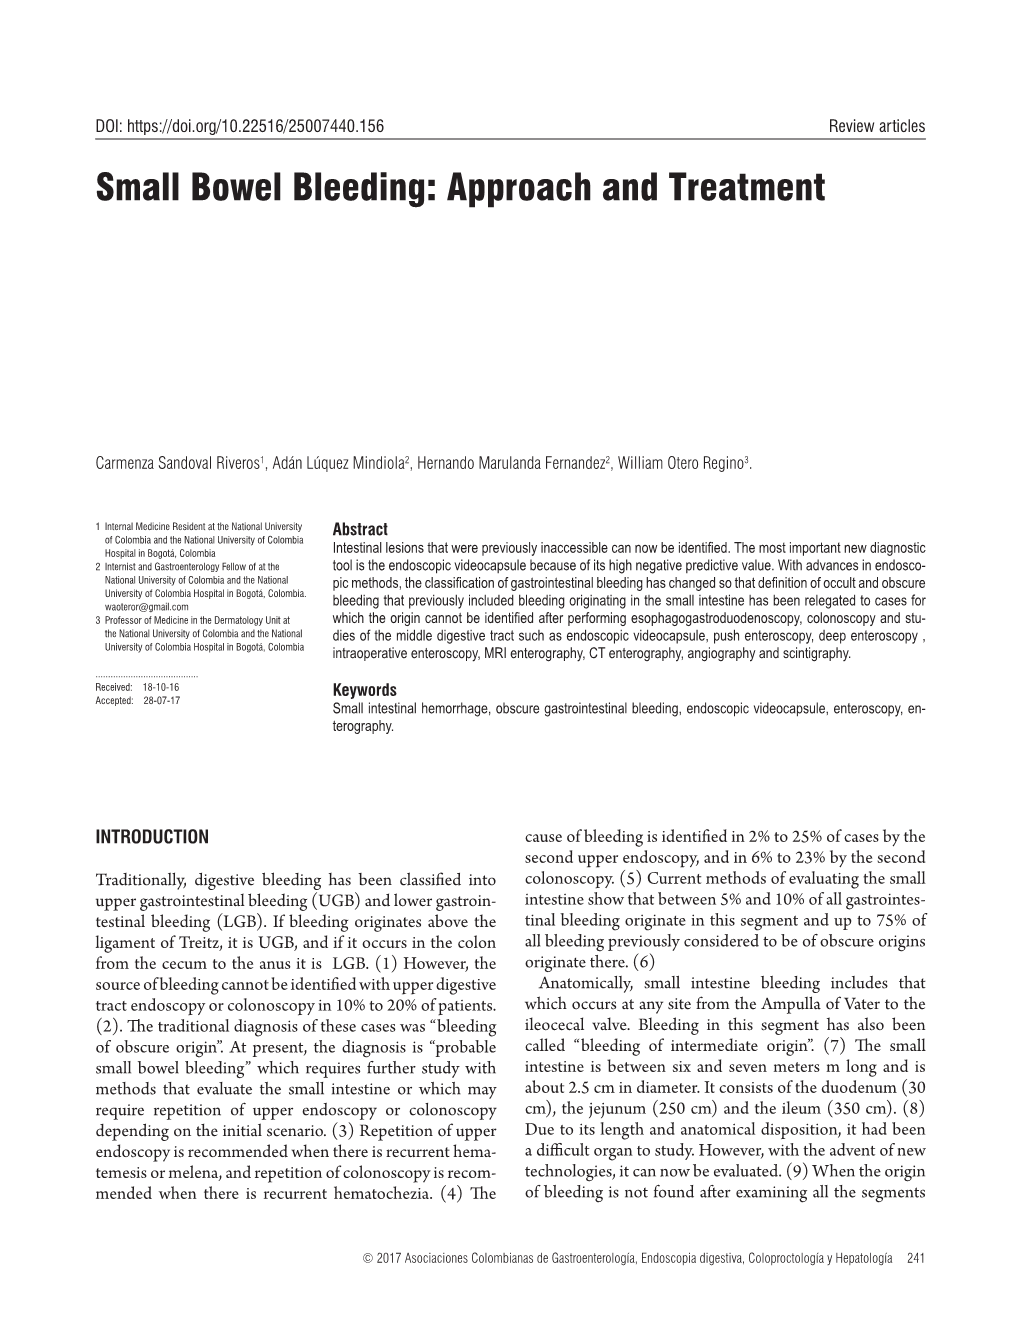 Small Bowel Bleeding: Approach and Treatment